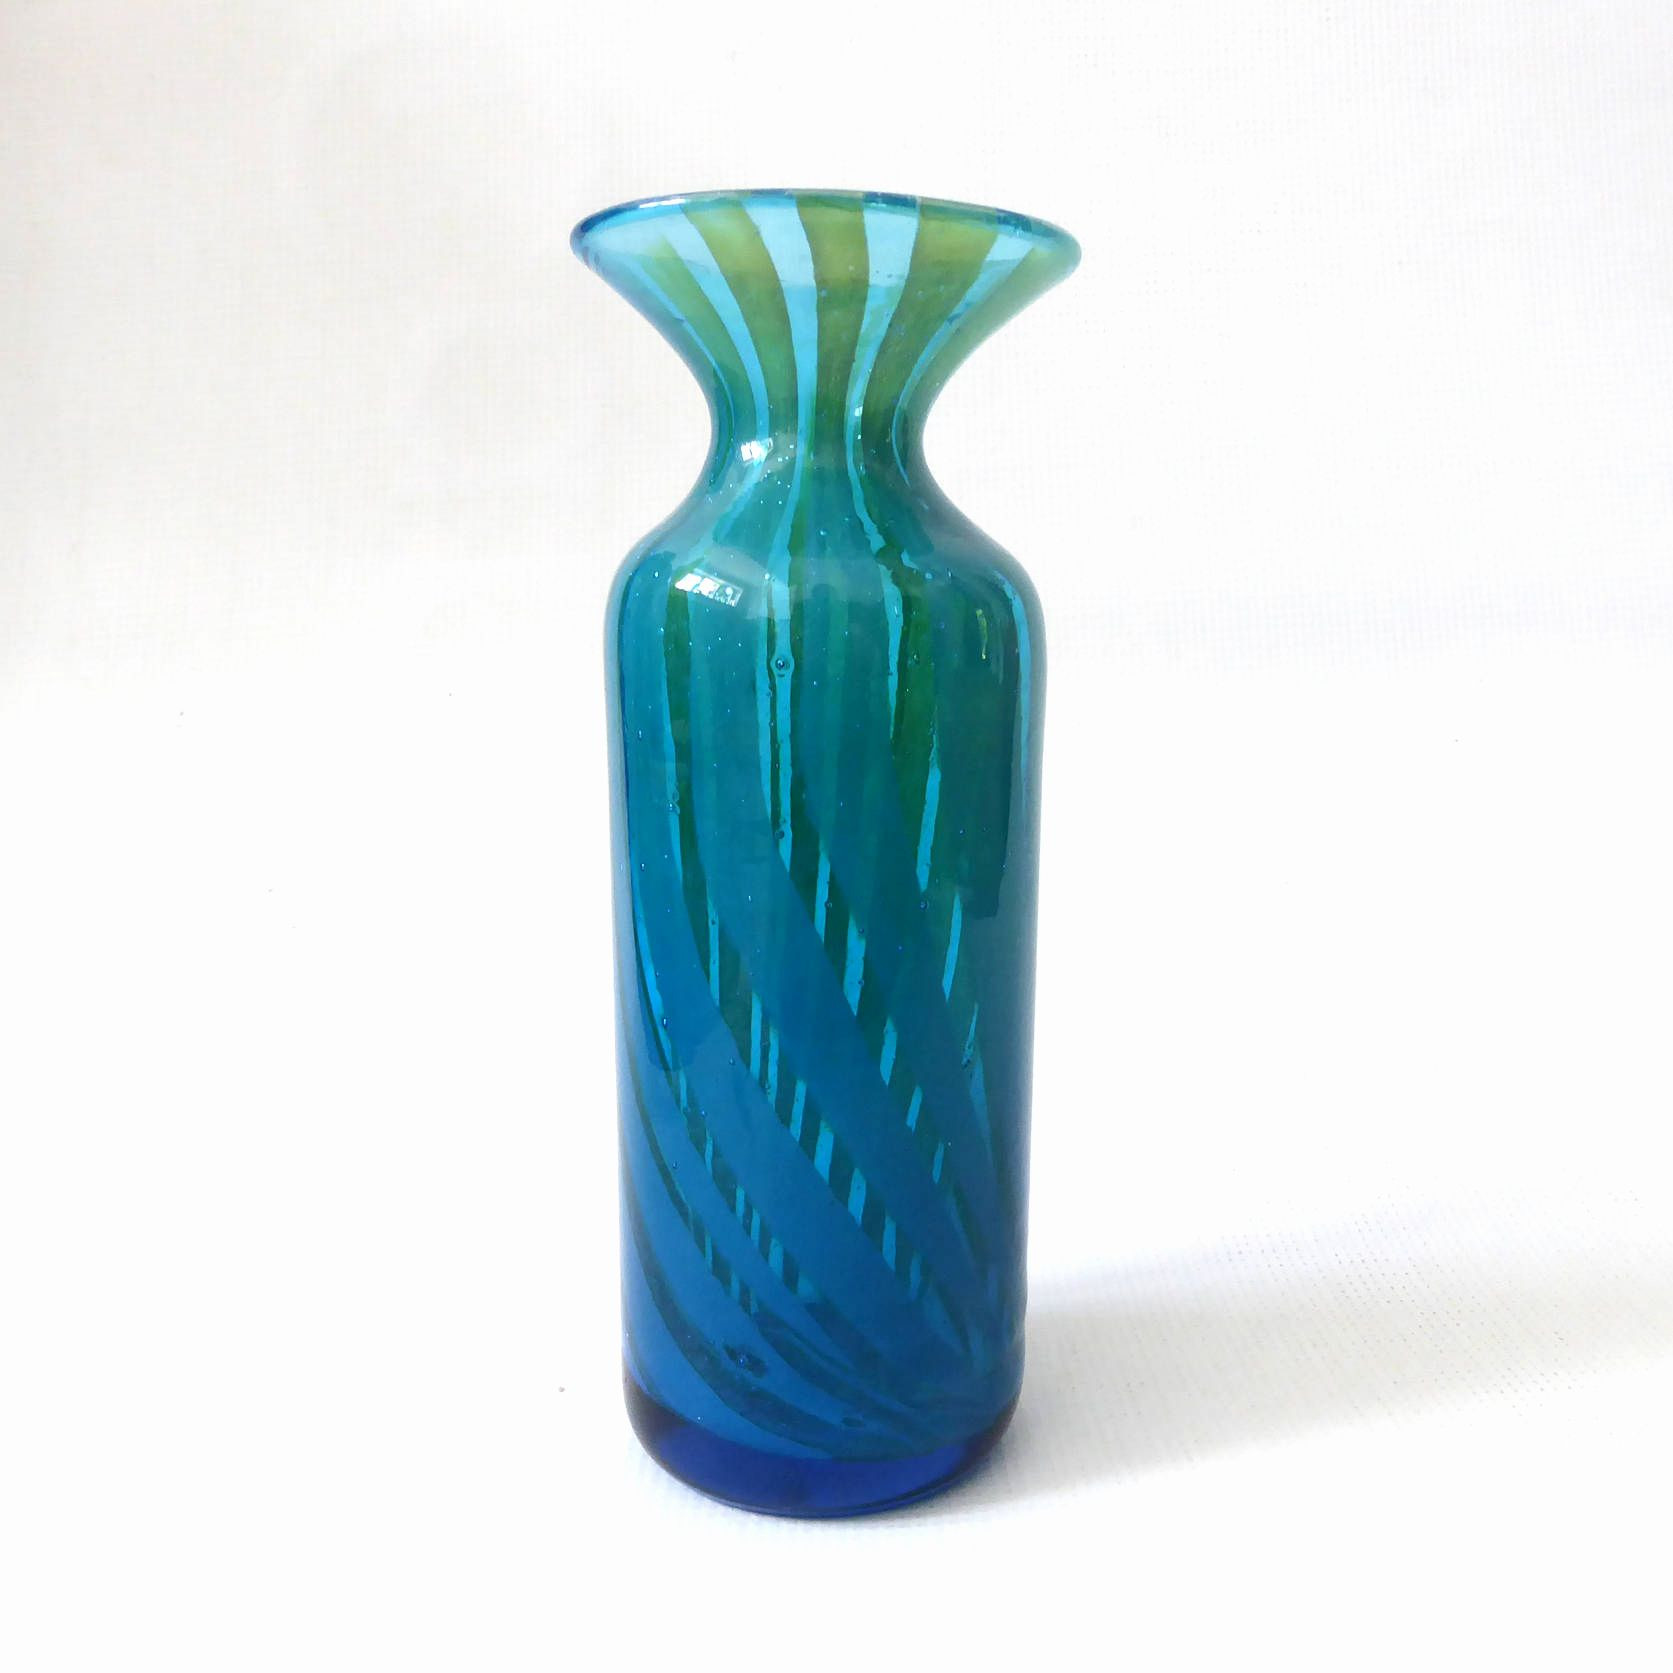 12 Nice Small Hand Blown Glass Vases 2022 free download small hand blown glass vases of 35 antique green glass vases the weekly world with regard to antique glass vases identify vase and cellar image avorcor